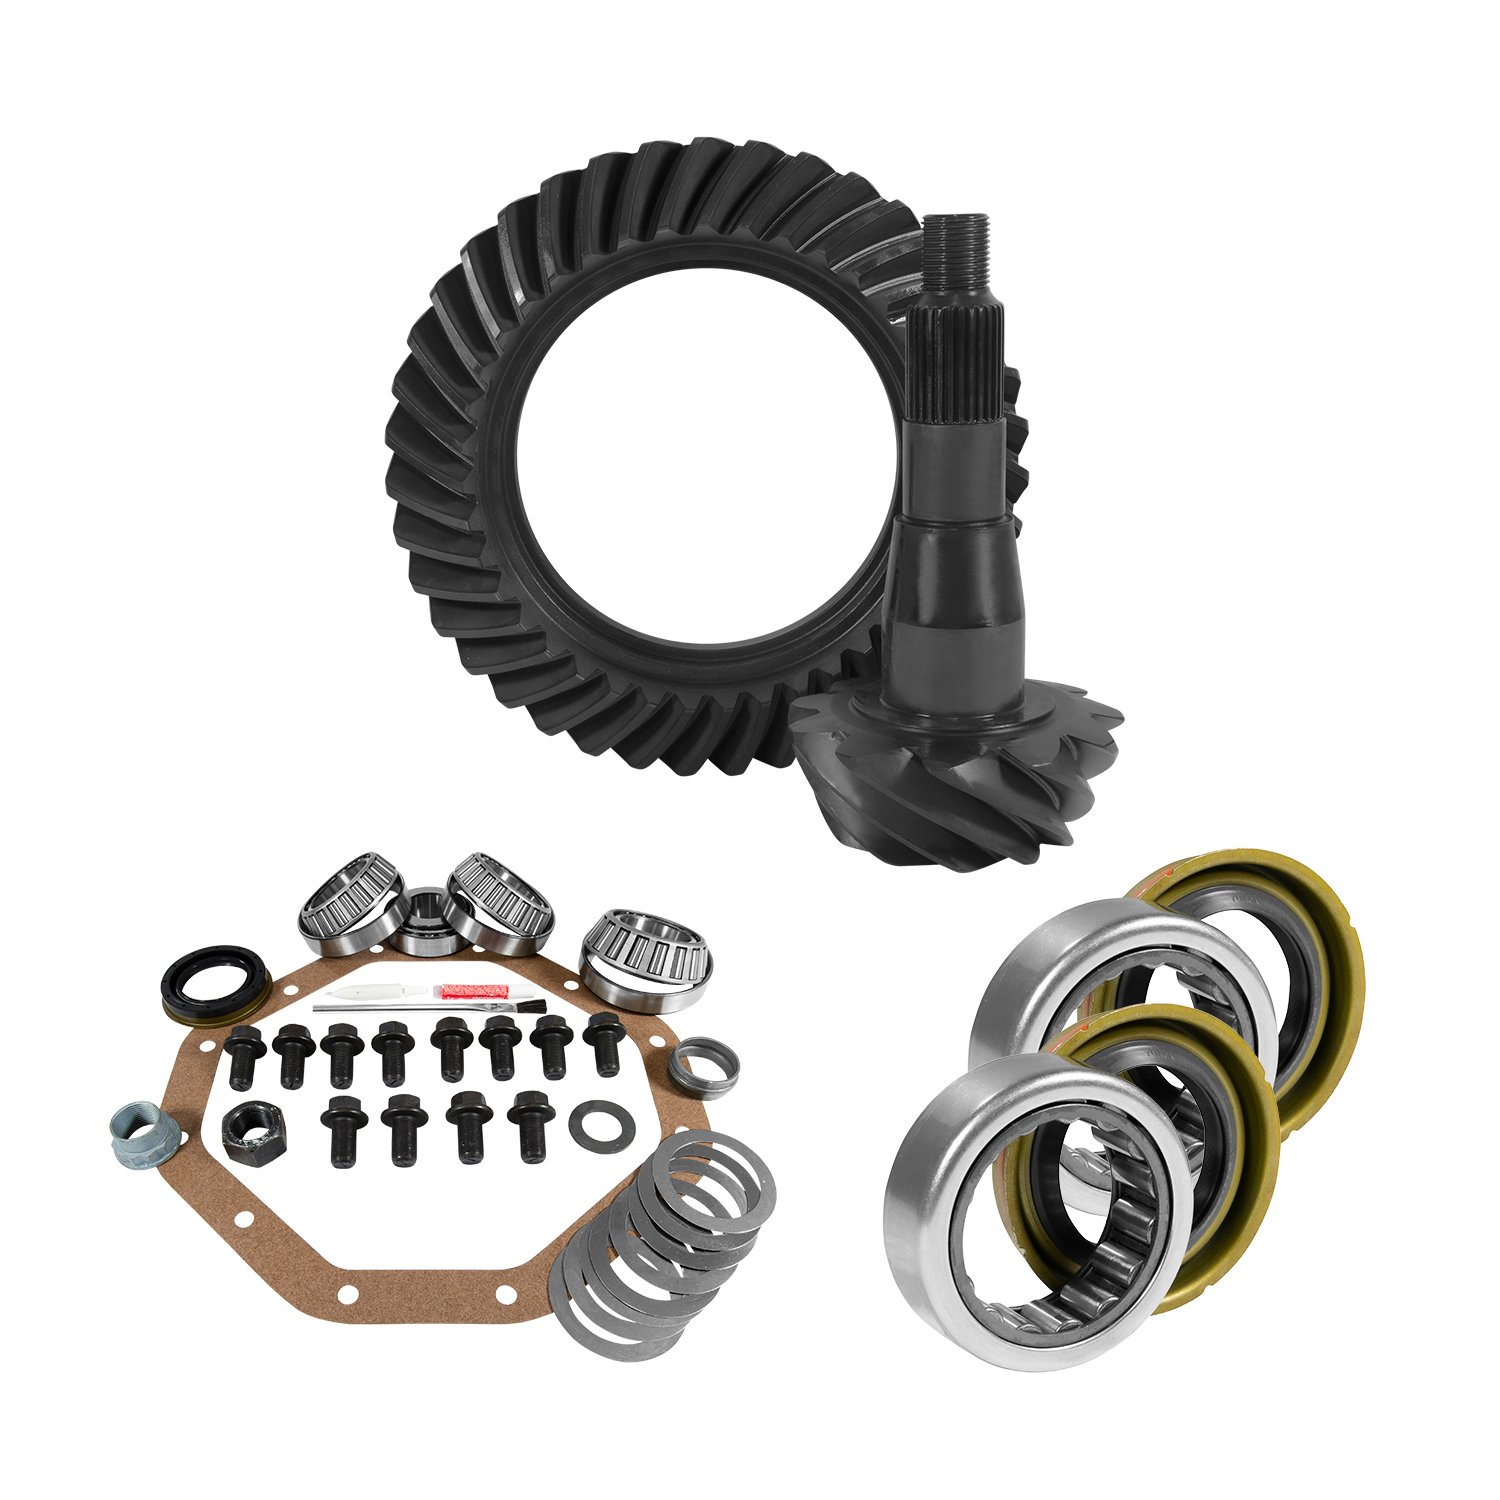 USA Standard 10794 Zf 9.25 in. Chy 3.55 Rear Ring & Pinion Install Kit, Axle Bearings & Seal